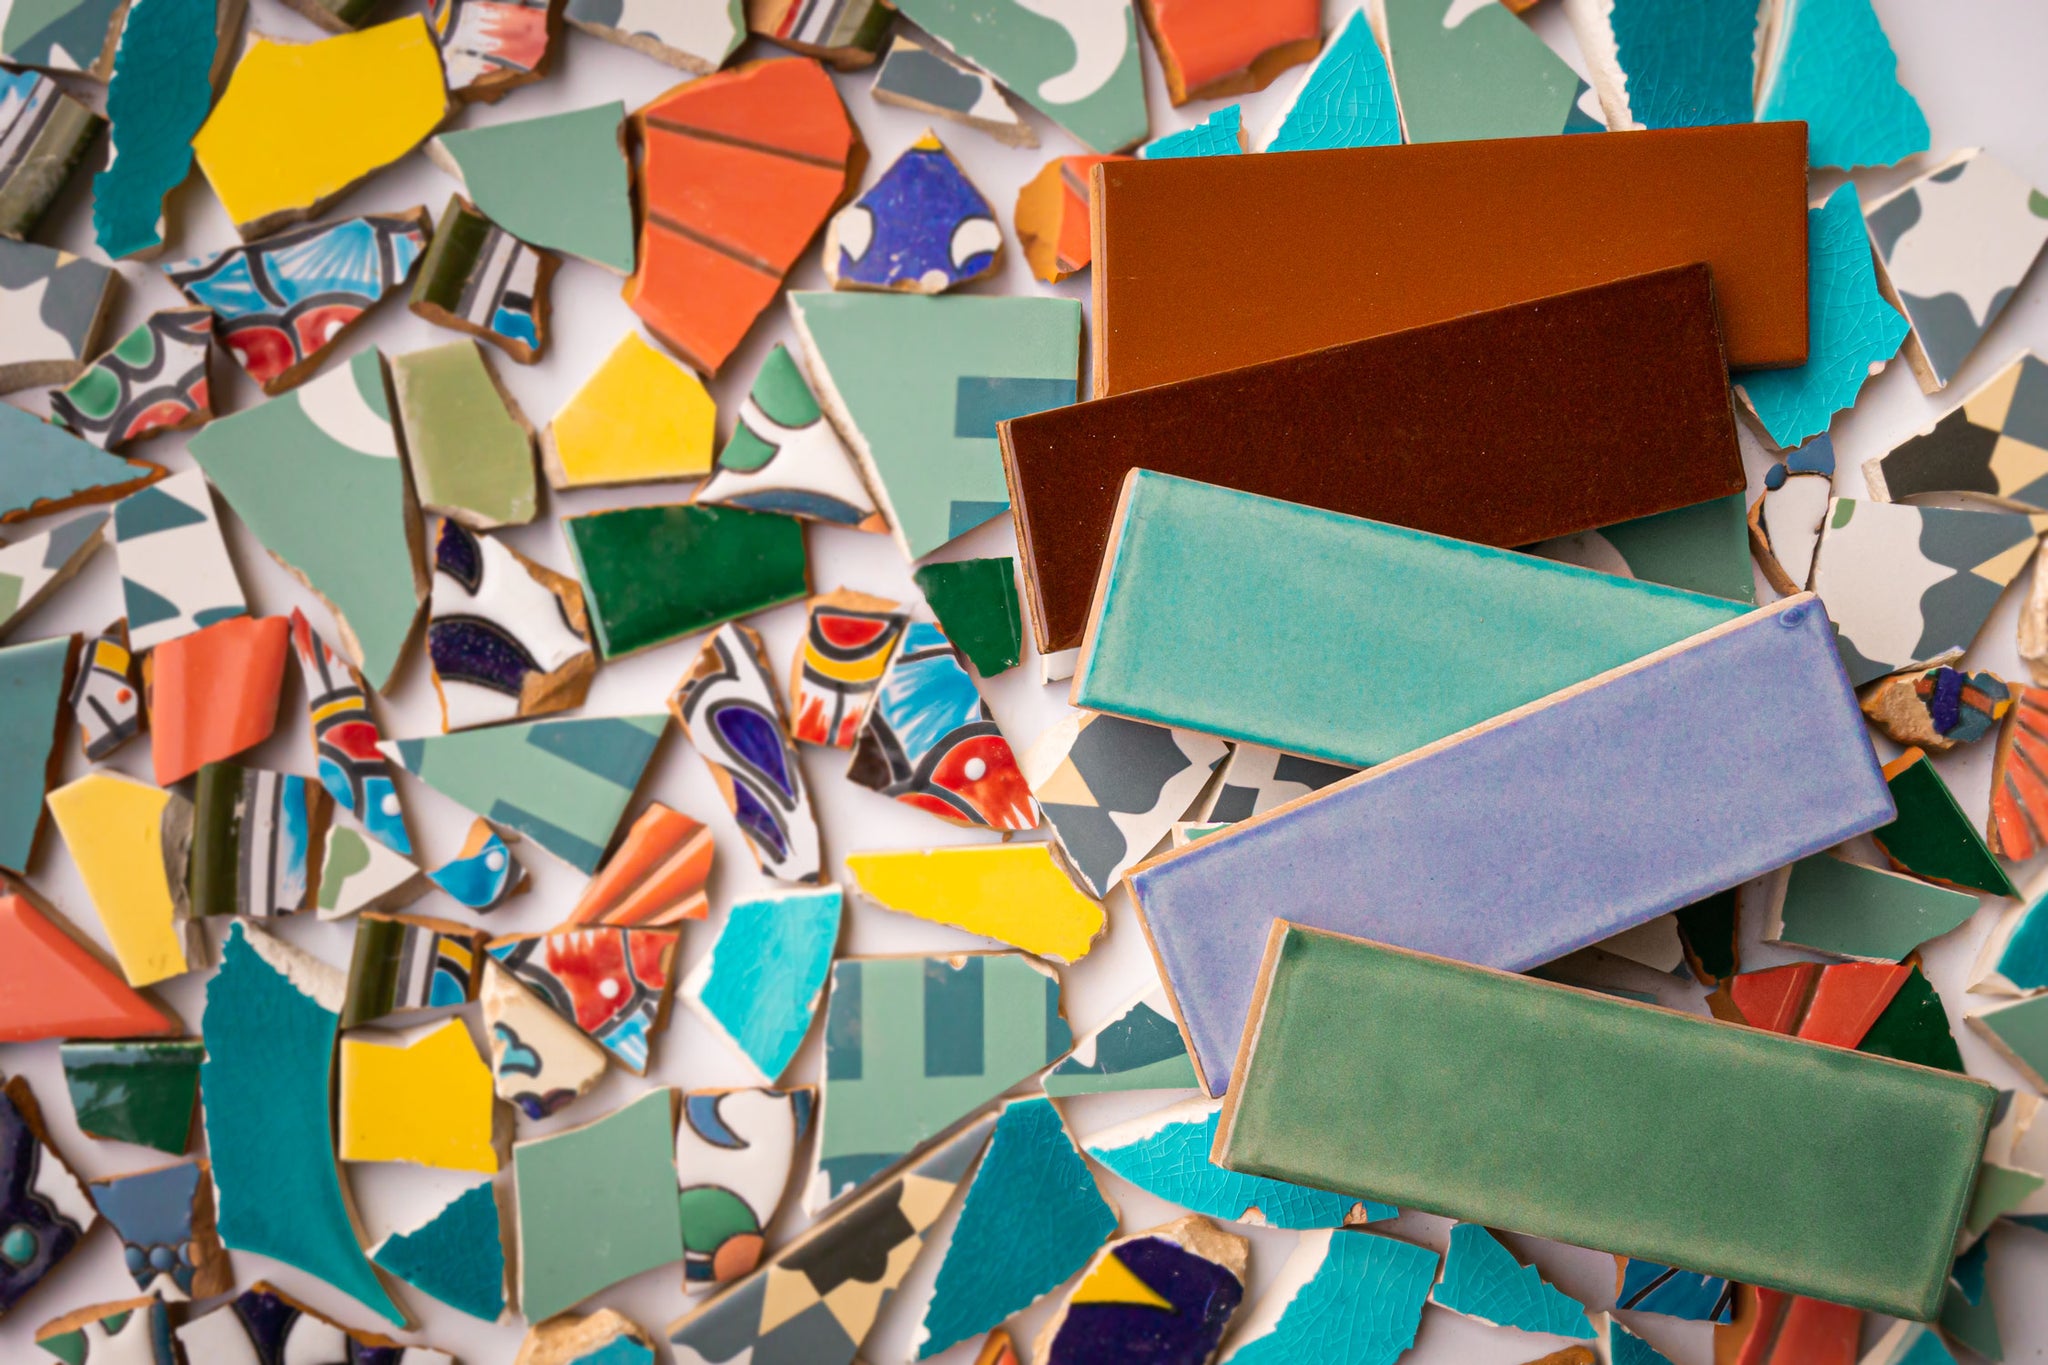 Colored tiles with tile scraps used to make recycled tiles by Clay Imports